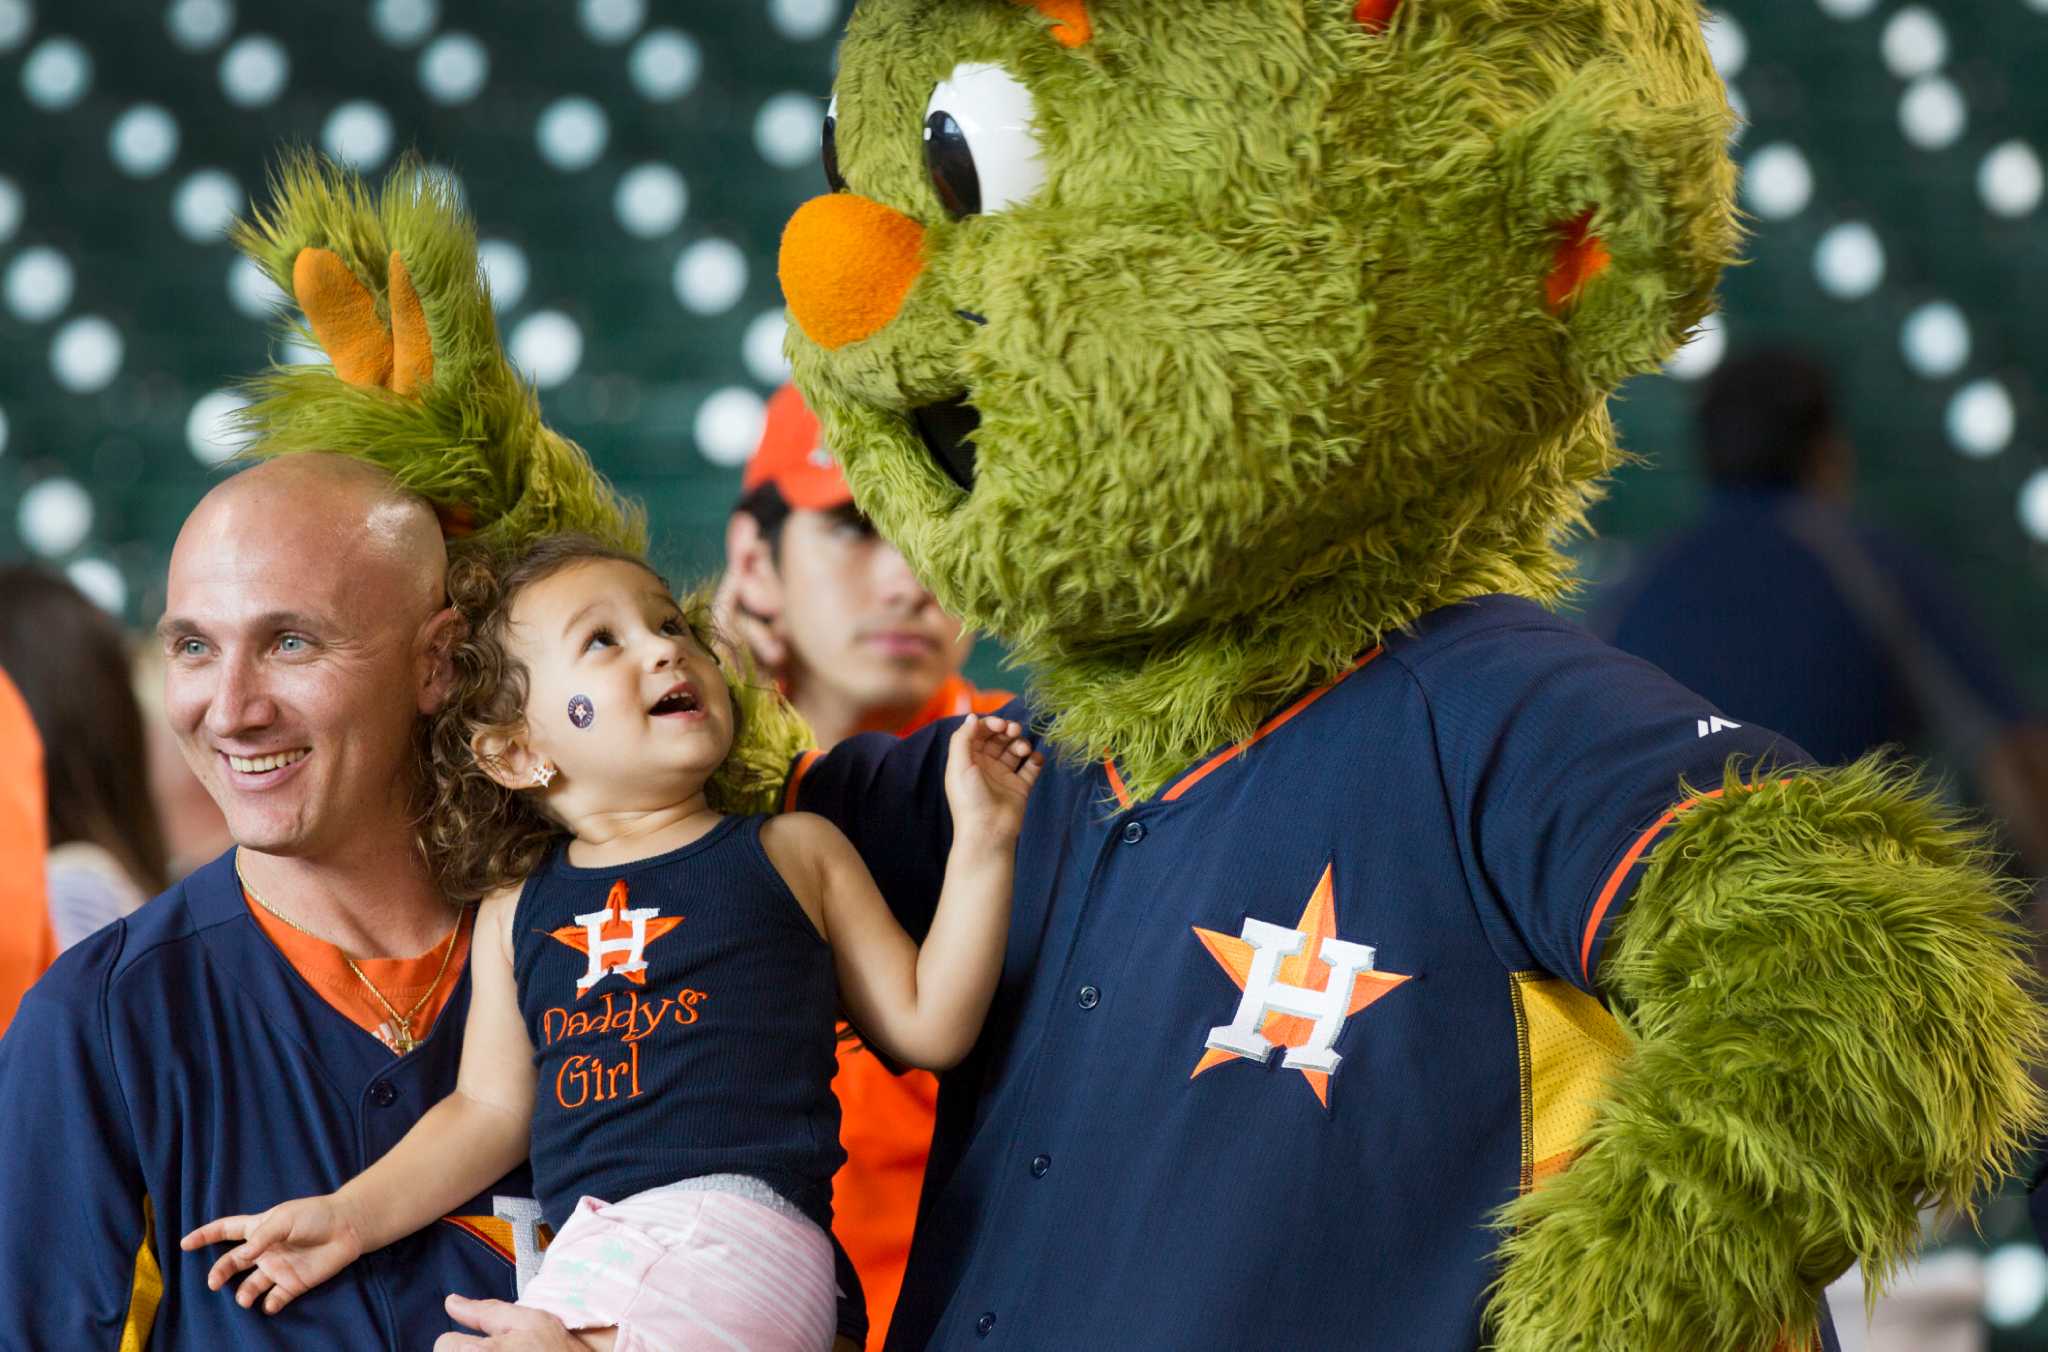 How to get your Christmas card photo taken with the Astros' Orbit